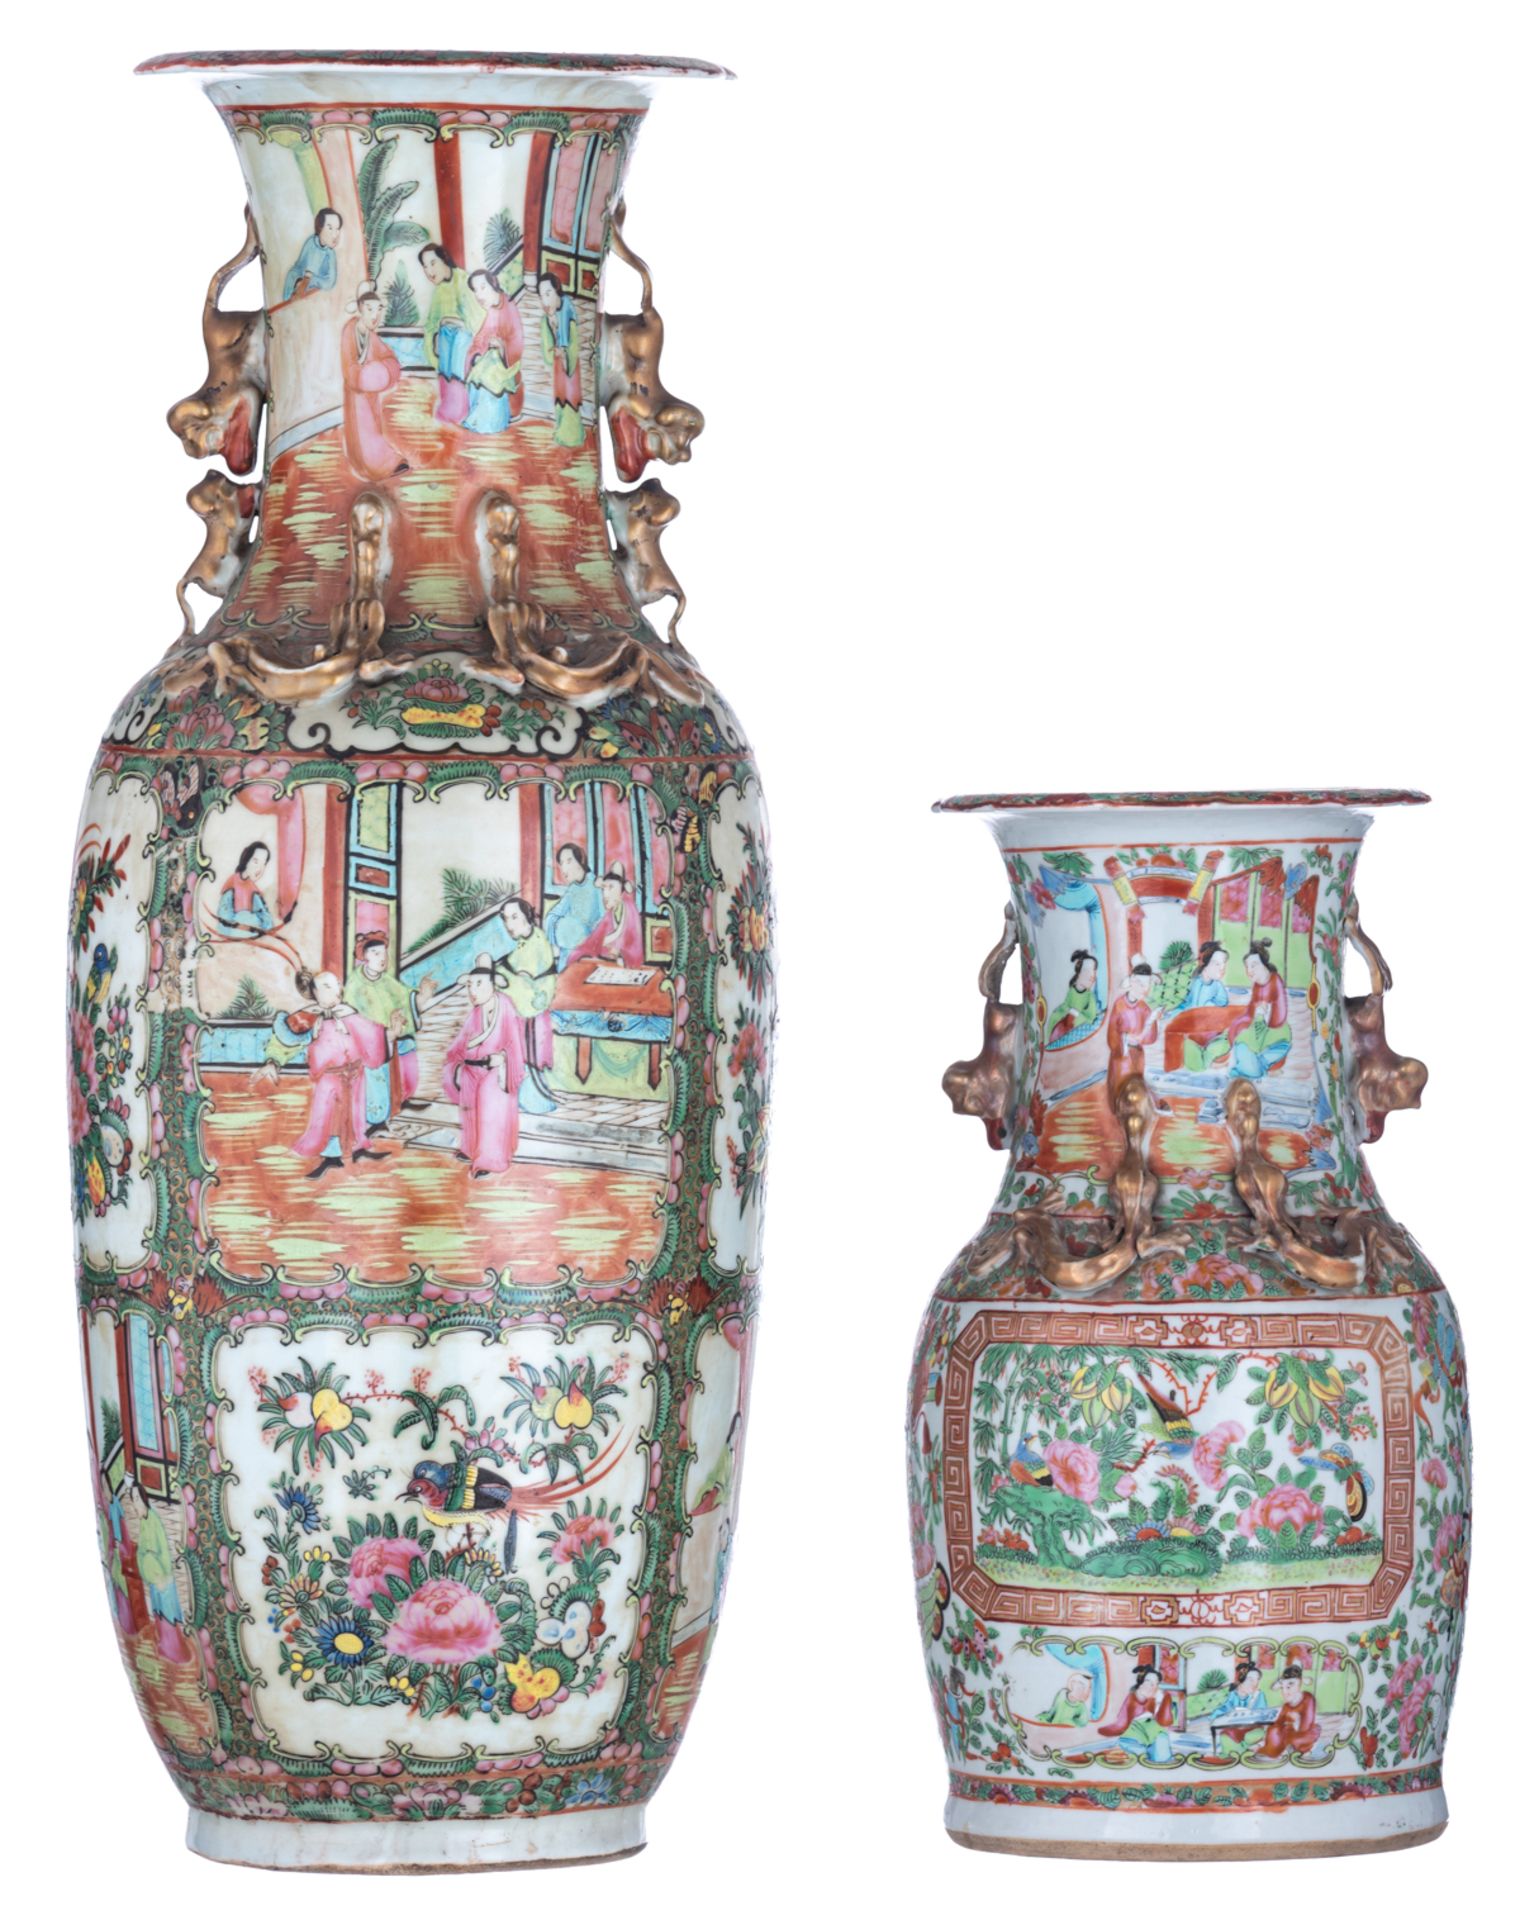 Two Chinese Canton polychrome vases, decorated with figures, birds and flowers, H 35,5 - 60 cm - Image 2 of 7